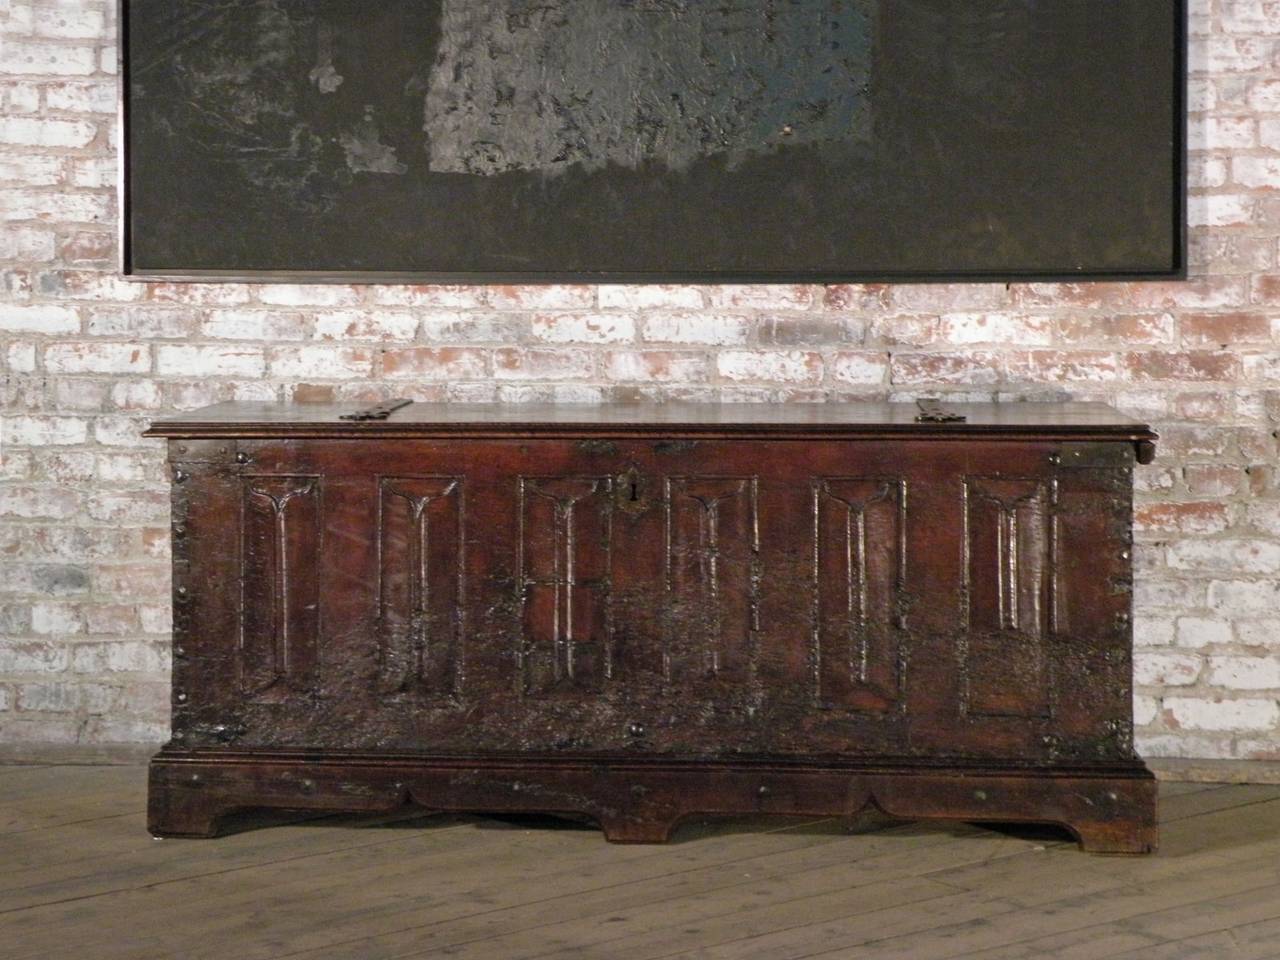 A rare survivor from the late 15th century. The large size, simple linear design with the decorative book fold panels in contrast with the distressed look give it an attractive archaeological appearance. The visible construction showing the massive